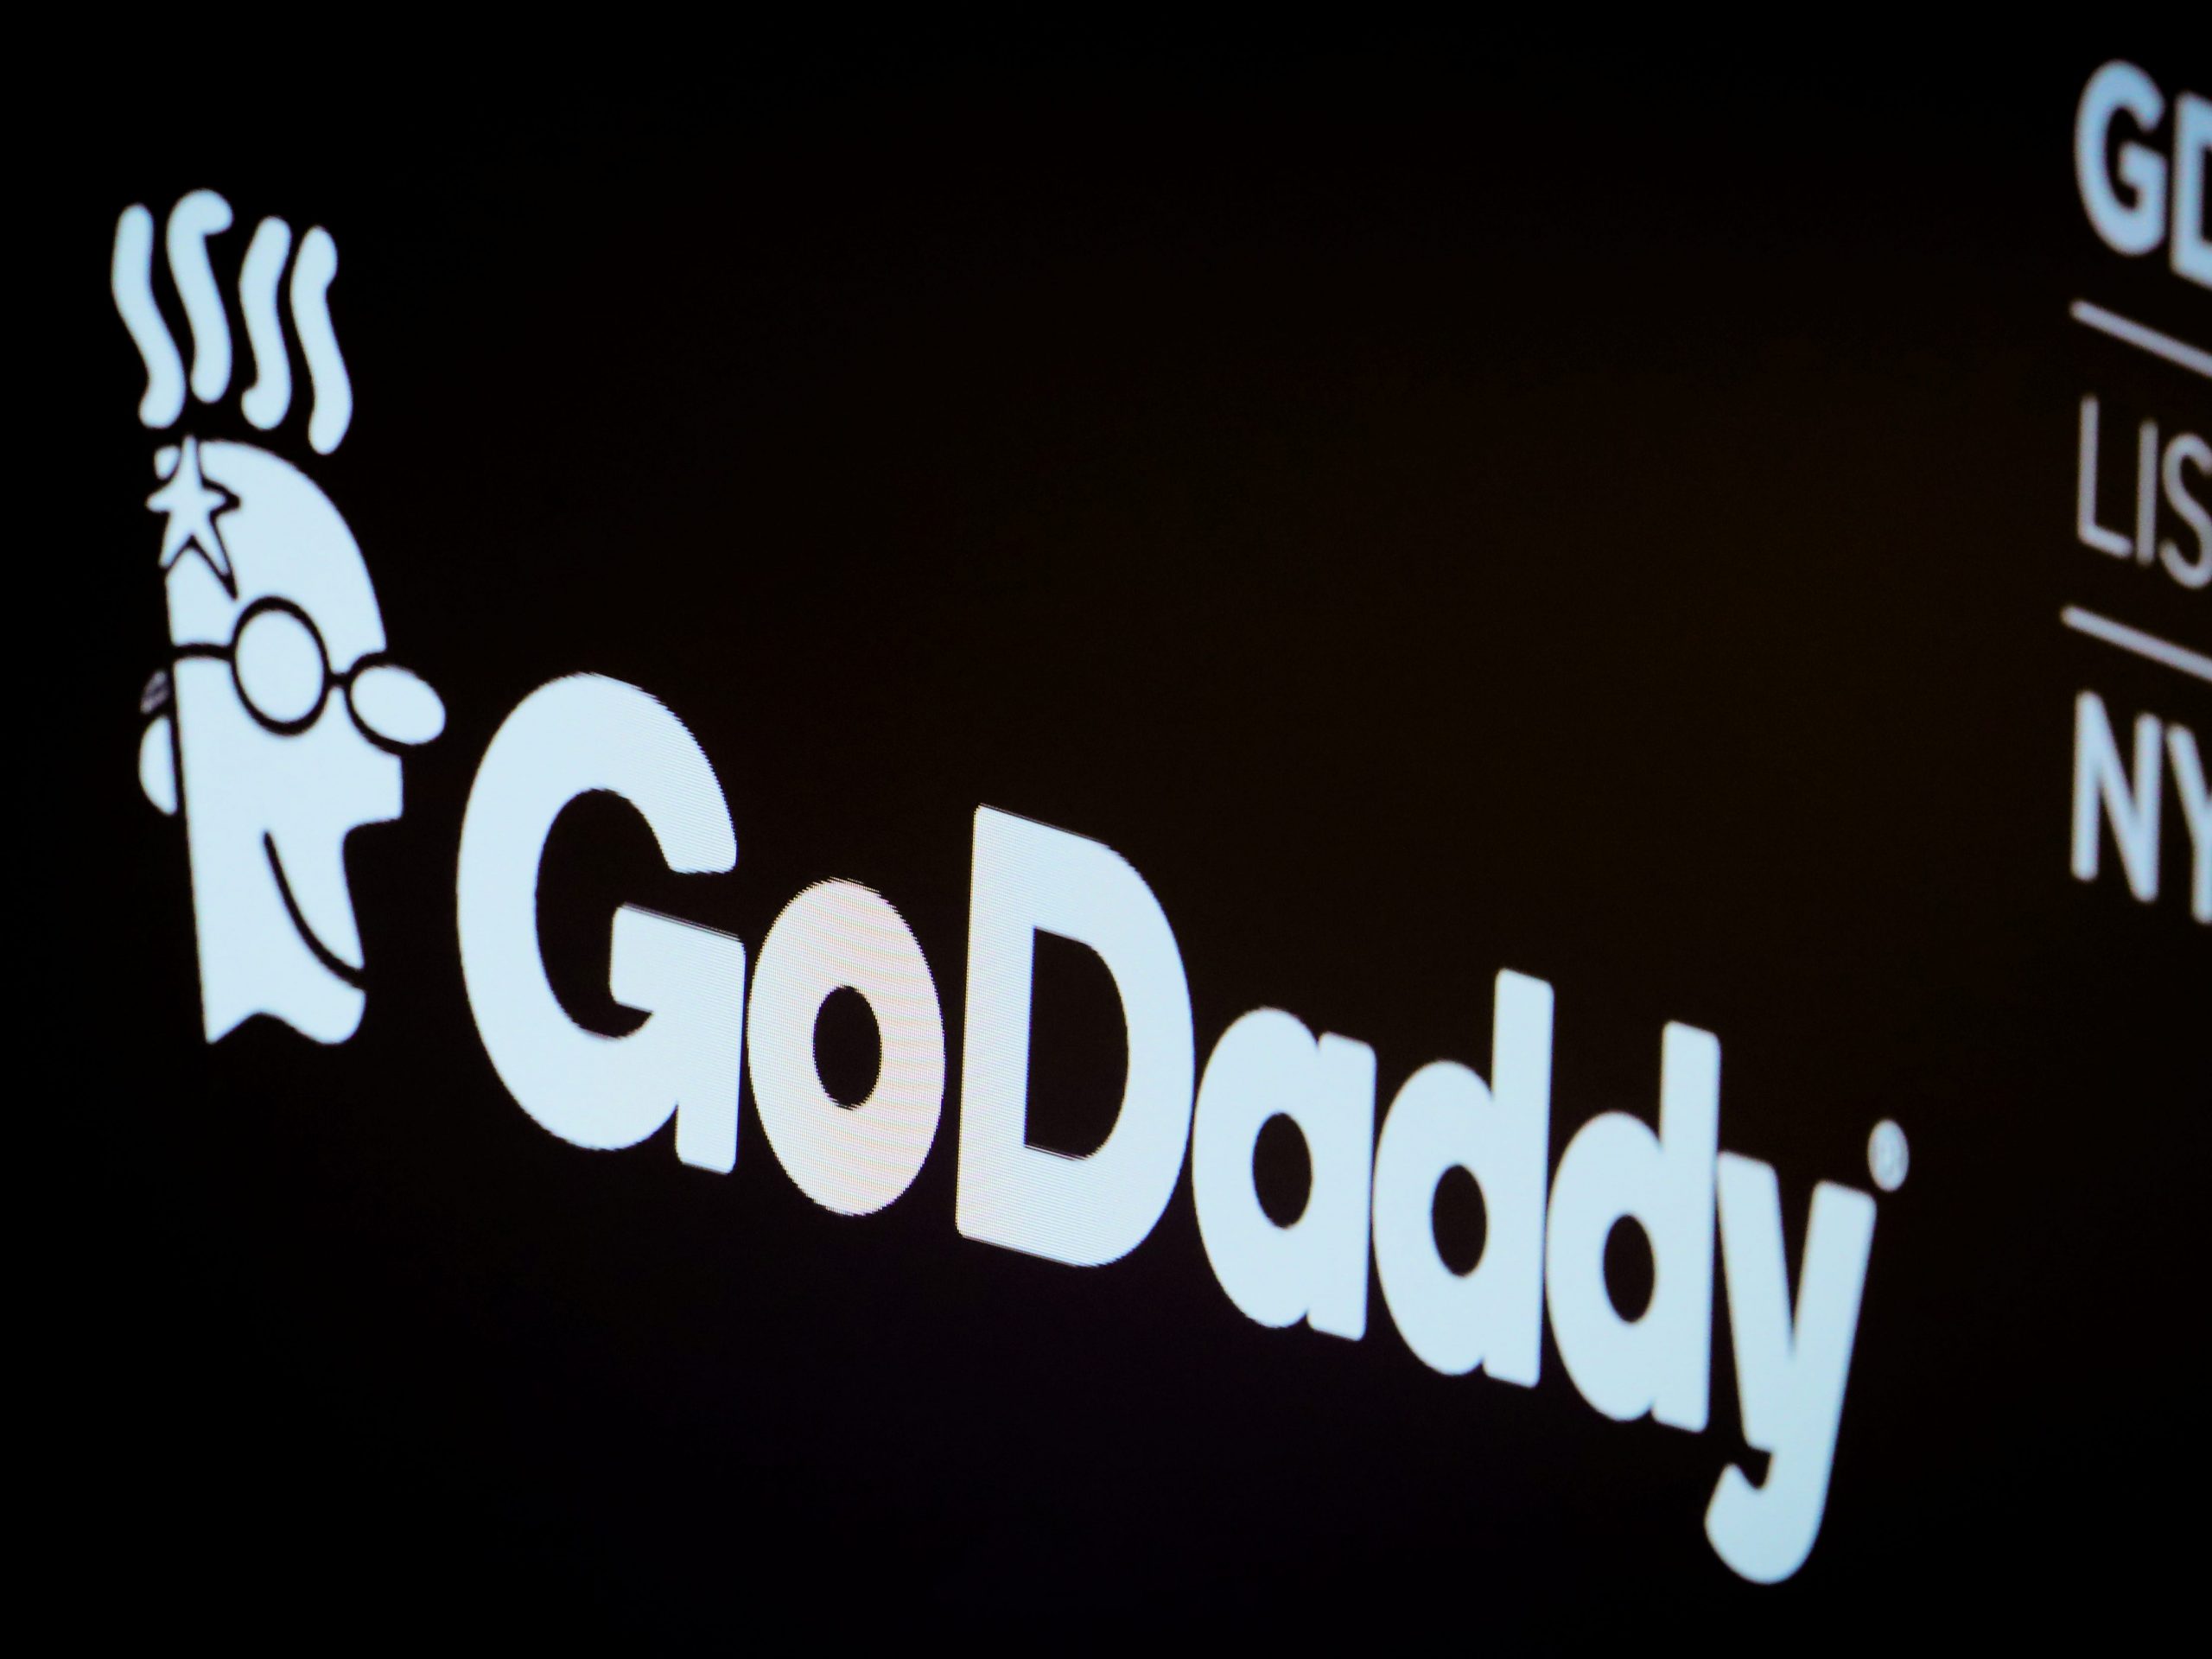 FILE PHOTO: The company logo and ticker for GoDaddy Inc. is displayed on a screen on the floor of the New York Stock Exchange (NYSE) in New York, U.S., March 4, 2019. REUTERS/Brendan McDermid